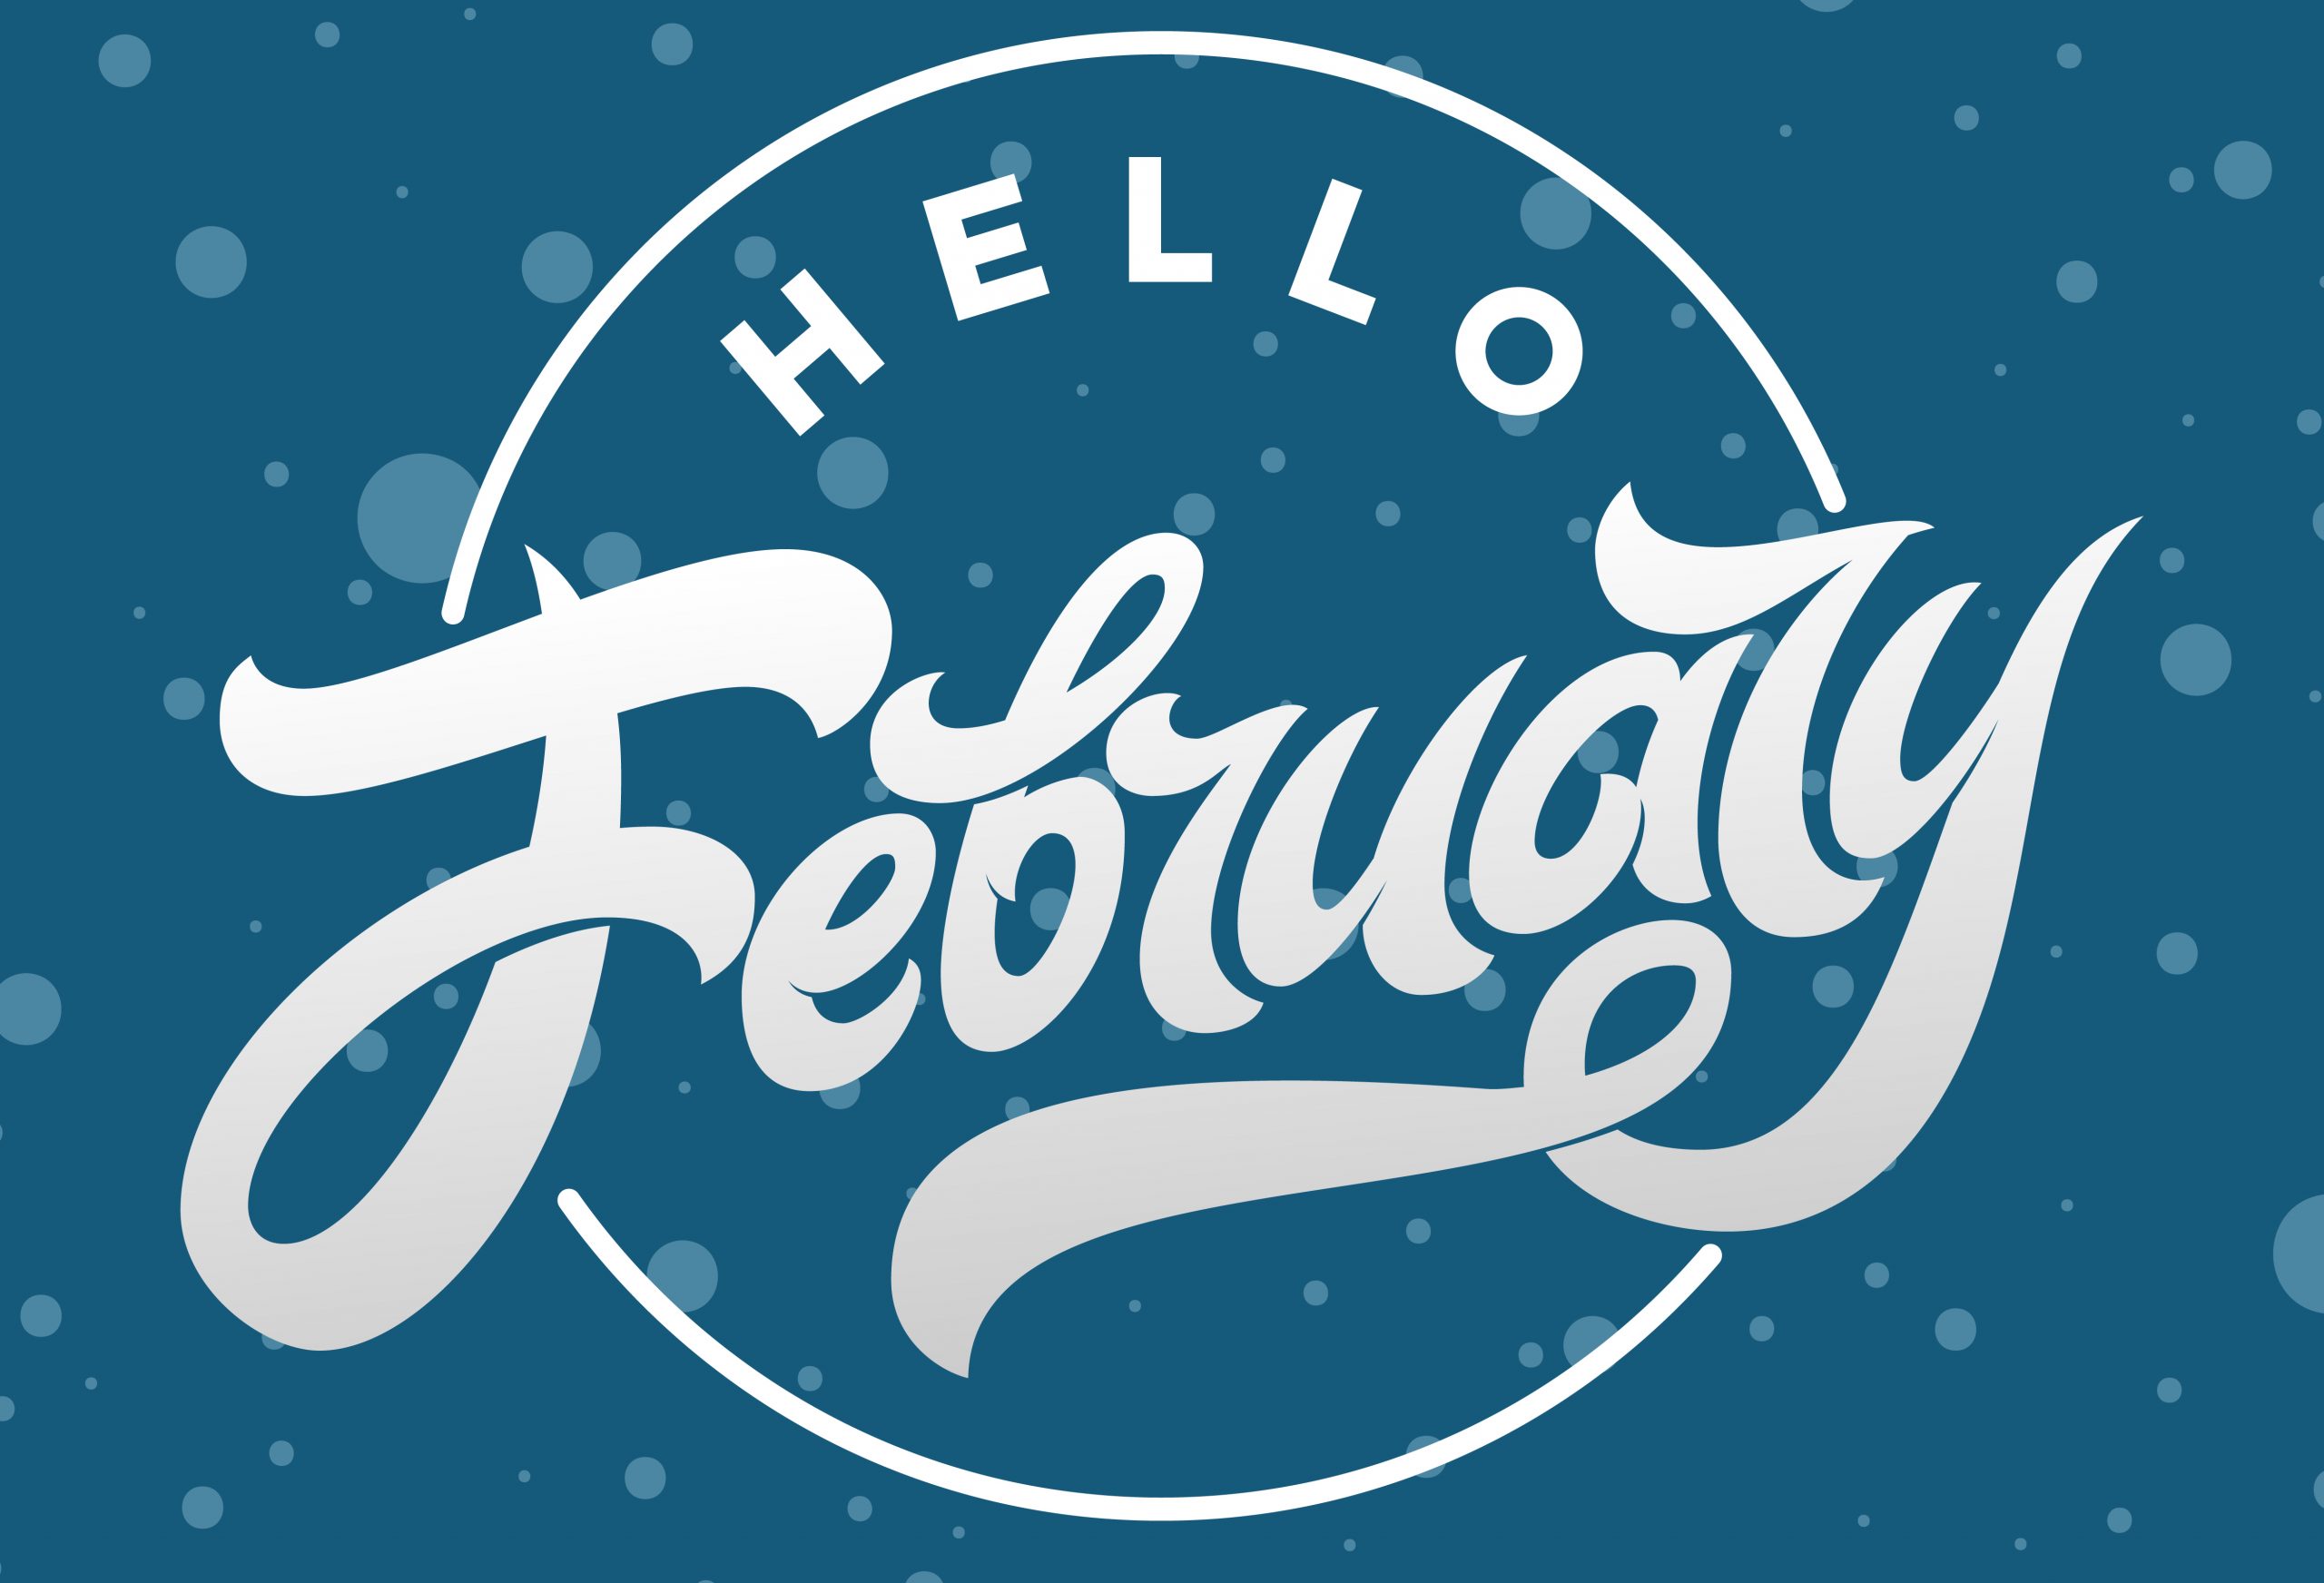 White letters Hello February on blue background with falling snow. Used for banners, calendars, posters, icons, labels. Modern brush calligraphy. Vector illustration.